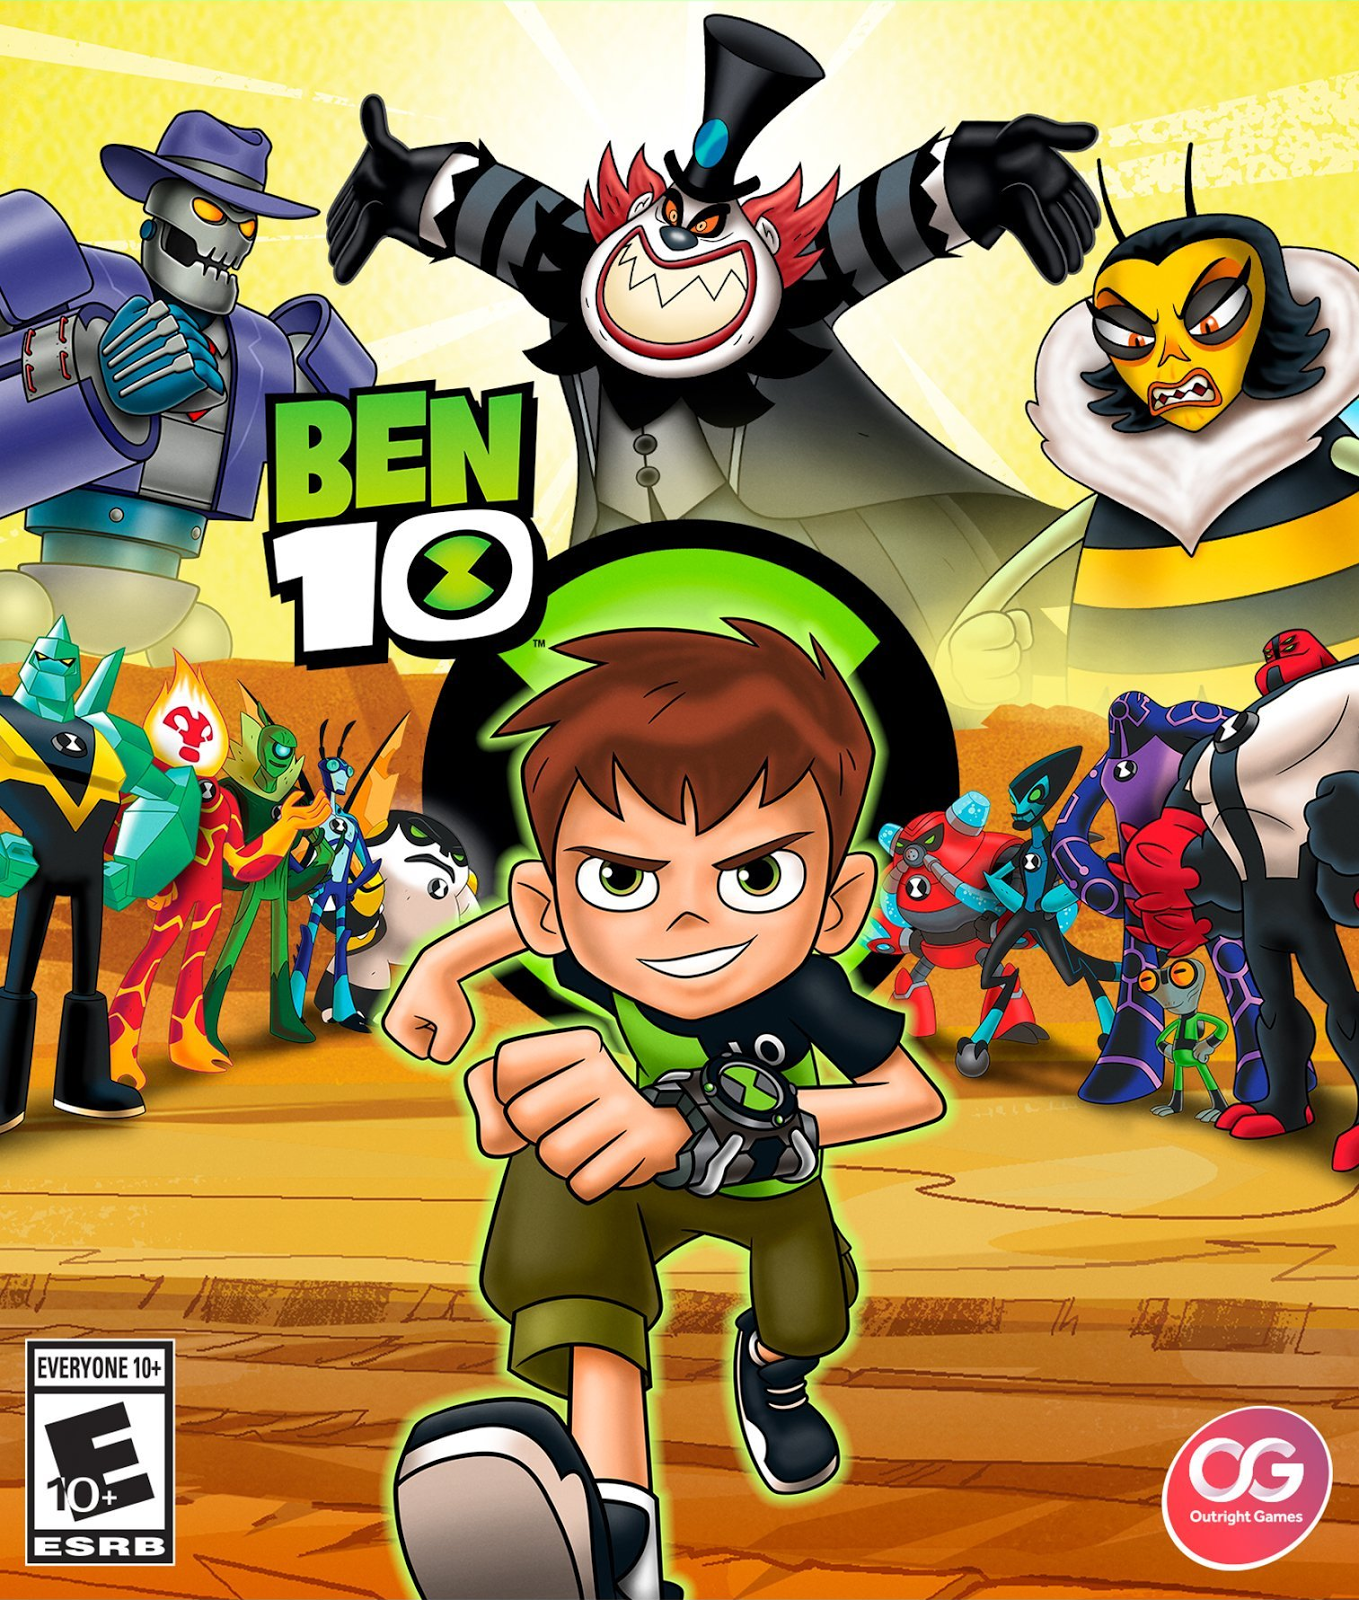 Omnicoid Void: Two New Ben 10 Reboot Episode Names Revealed